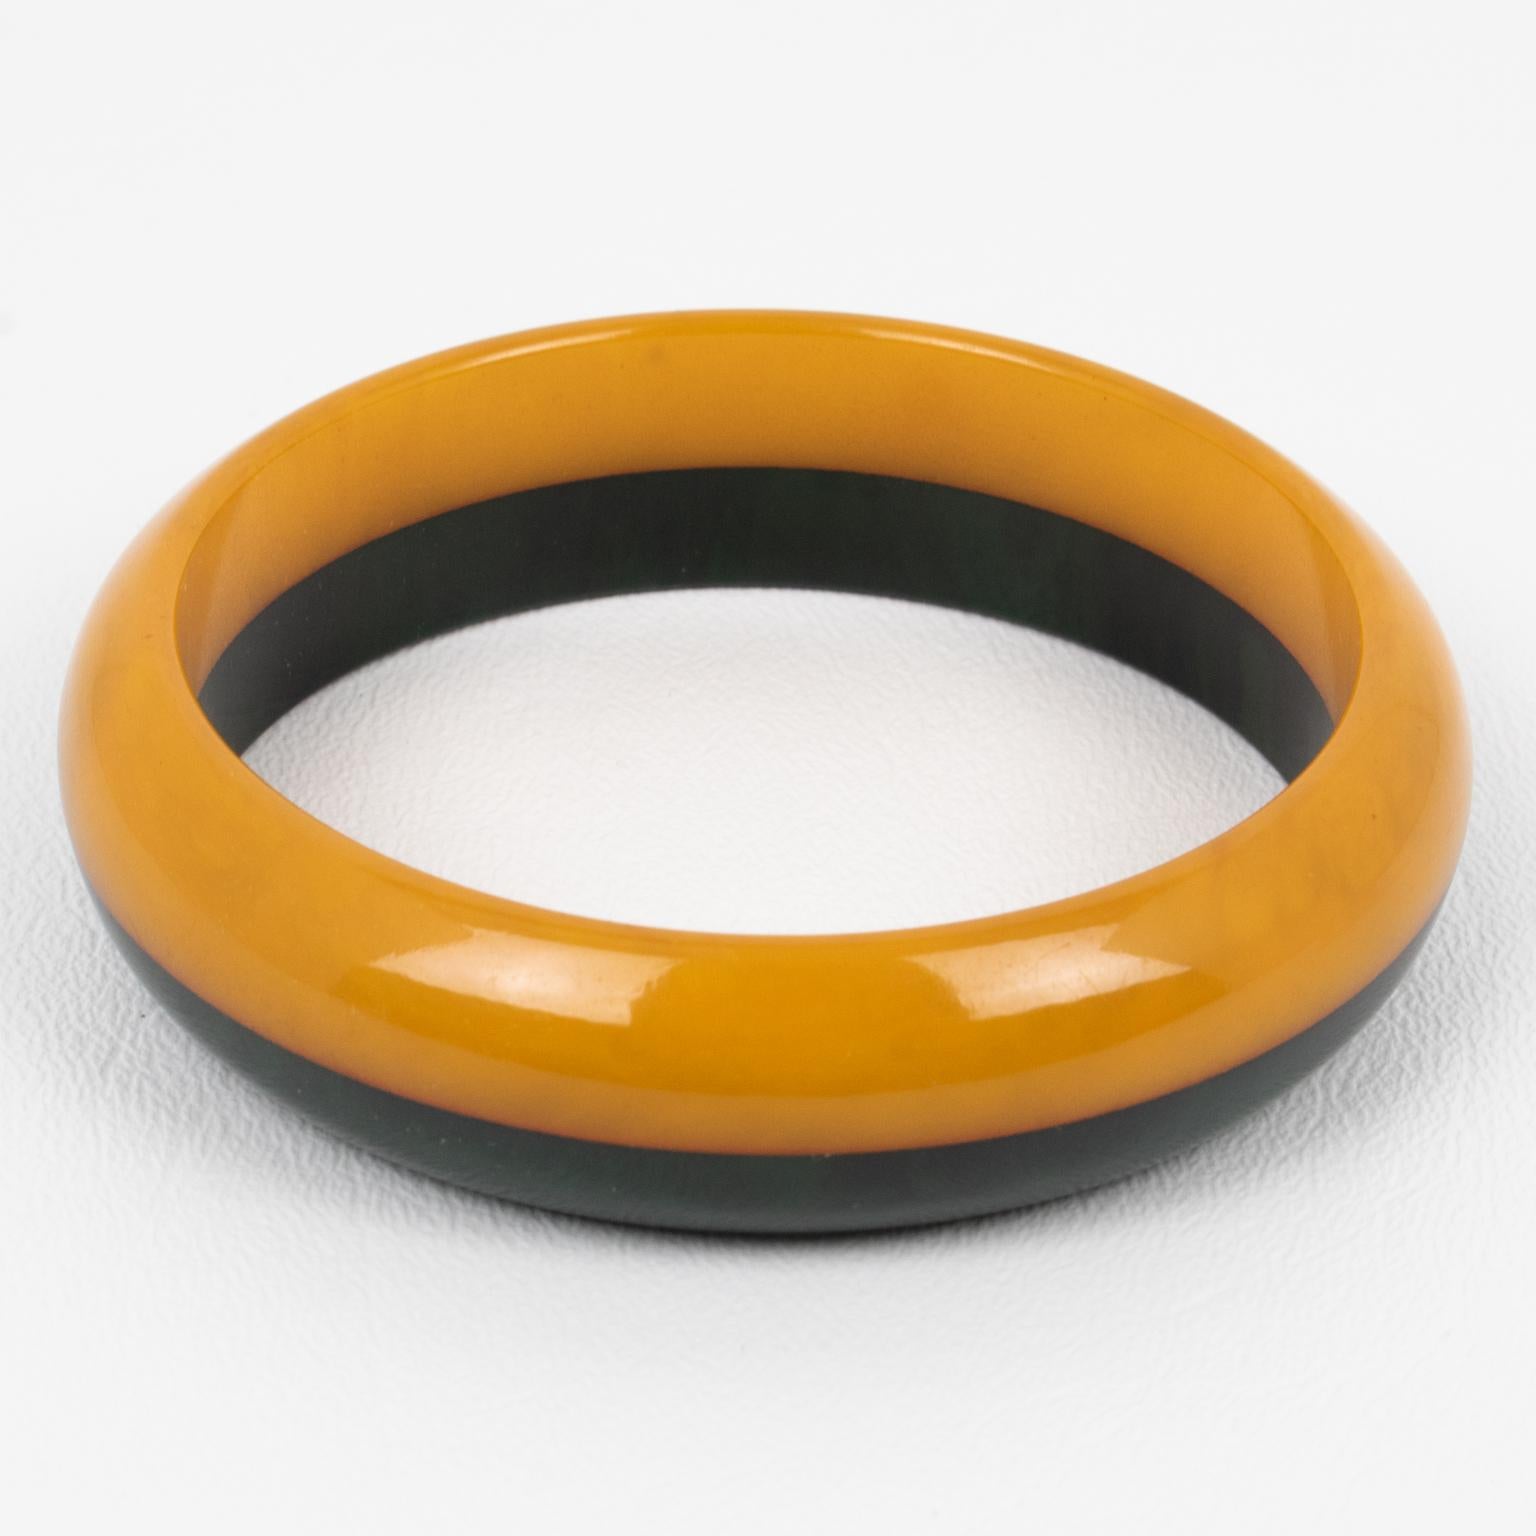 This is a lovely bi-color marble Bakelite laminated bracelet bangle. The piece features a chunky domed shape with a bi-layer design. The colors are a sunny orange butterscotch marble tone and dark green marble.
Measurements: Inside across 2.63 in